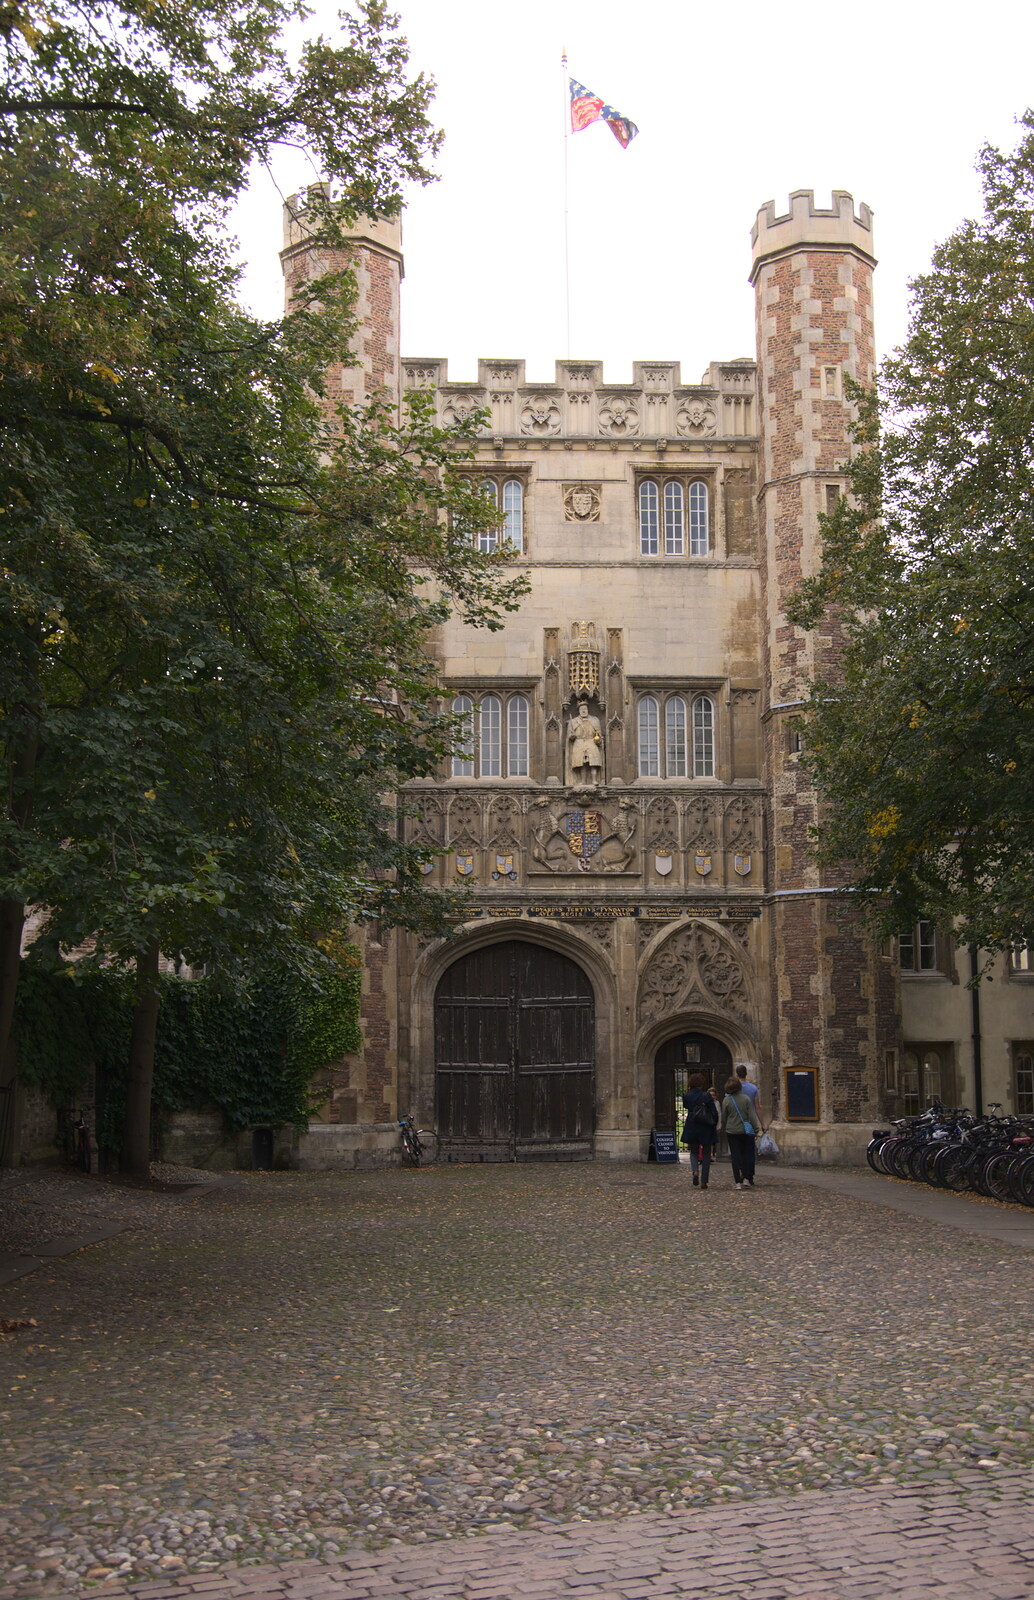 The main entrance to Trinity College from The Retro Computer Festival, Centre For Computing History, Cambridge - 15th September 2018